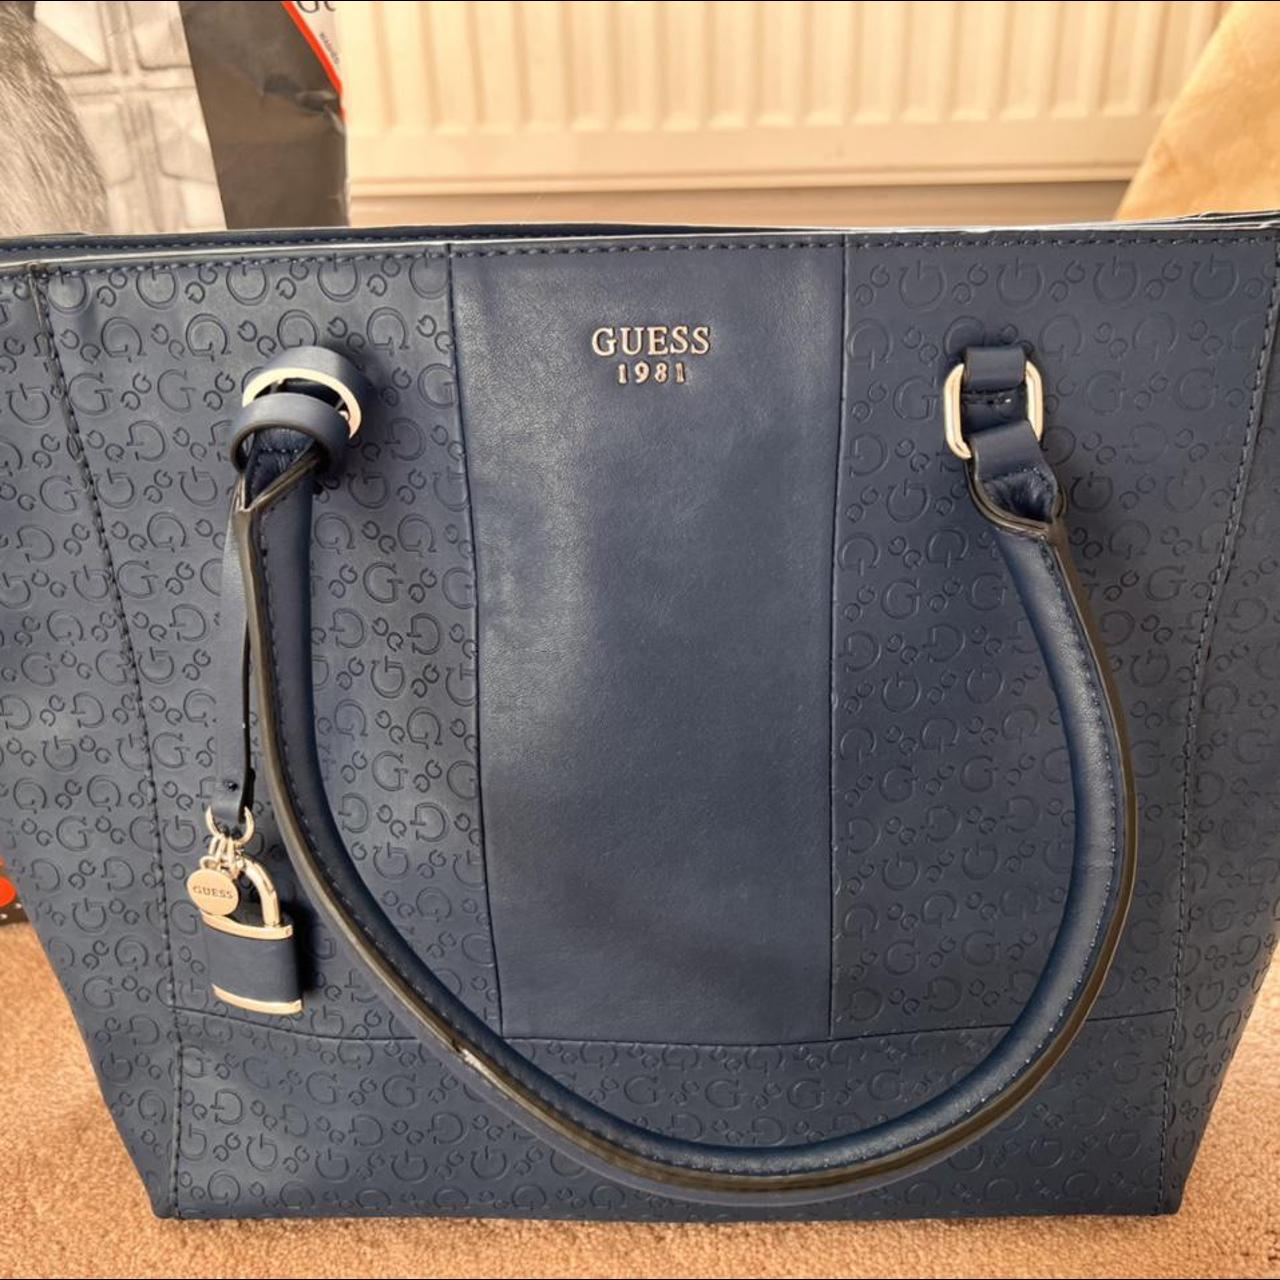 Brand new and unused Original Guess tote bag. Lovely